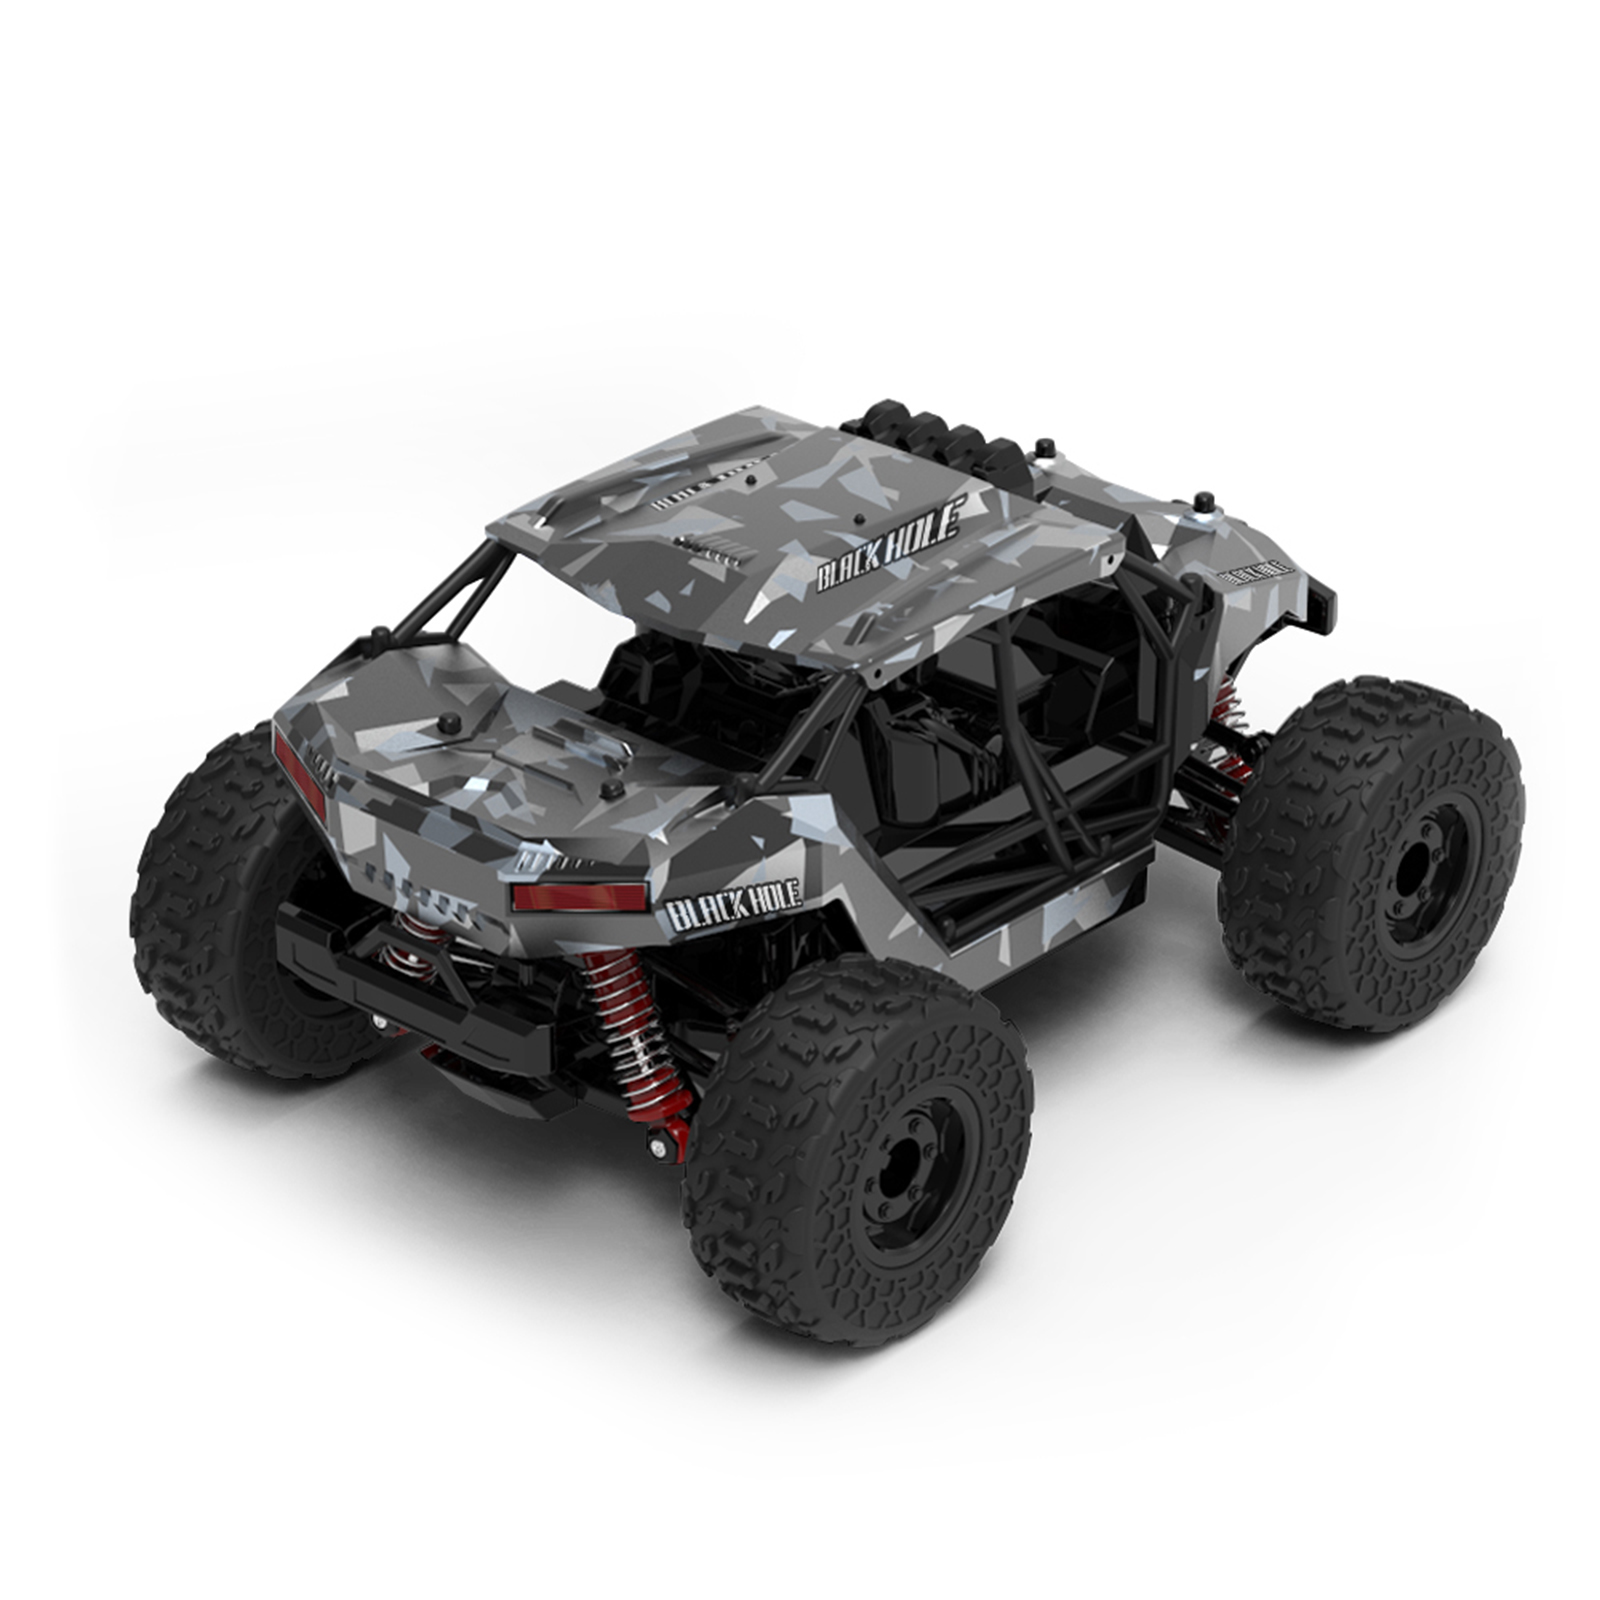 18331 1:18 Full Scale Remote Control Car With Lights 4WD 36KM/H High-speed Climbing Off-road Vehicle Rc Car Model Toys black